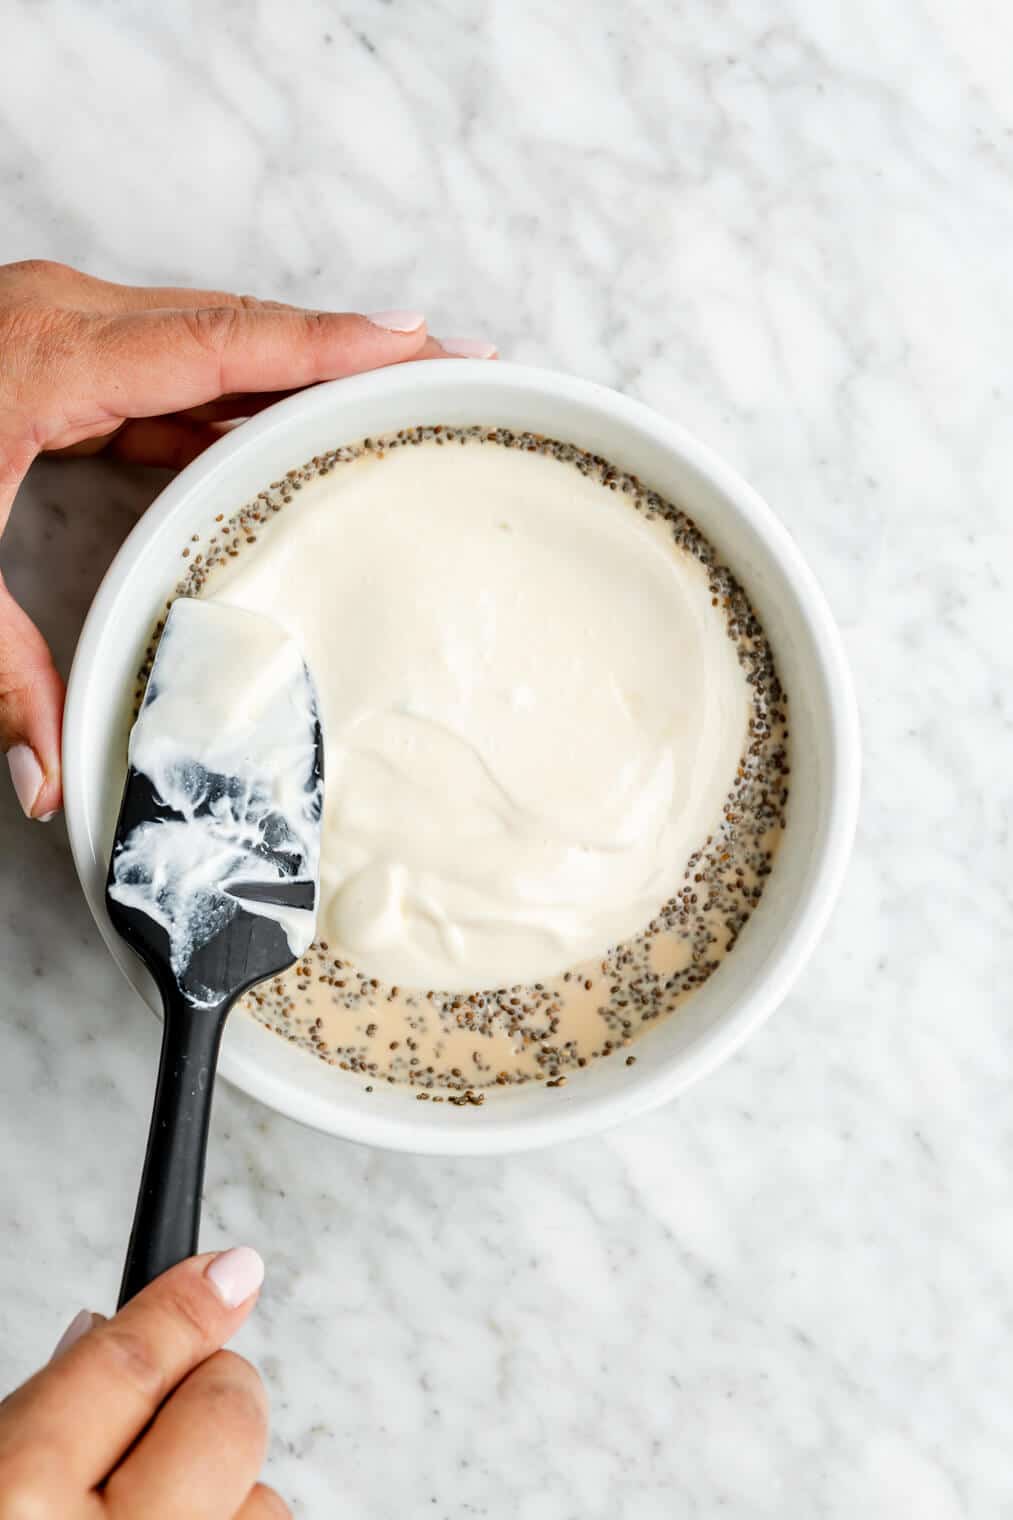 Hand using a black spatula to spread yogurt over the top of the oat mixture in a bowl.